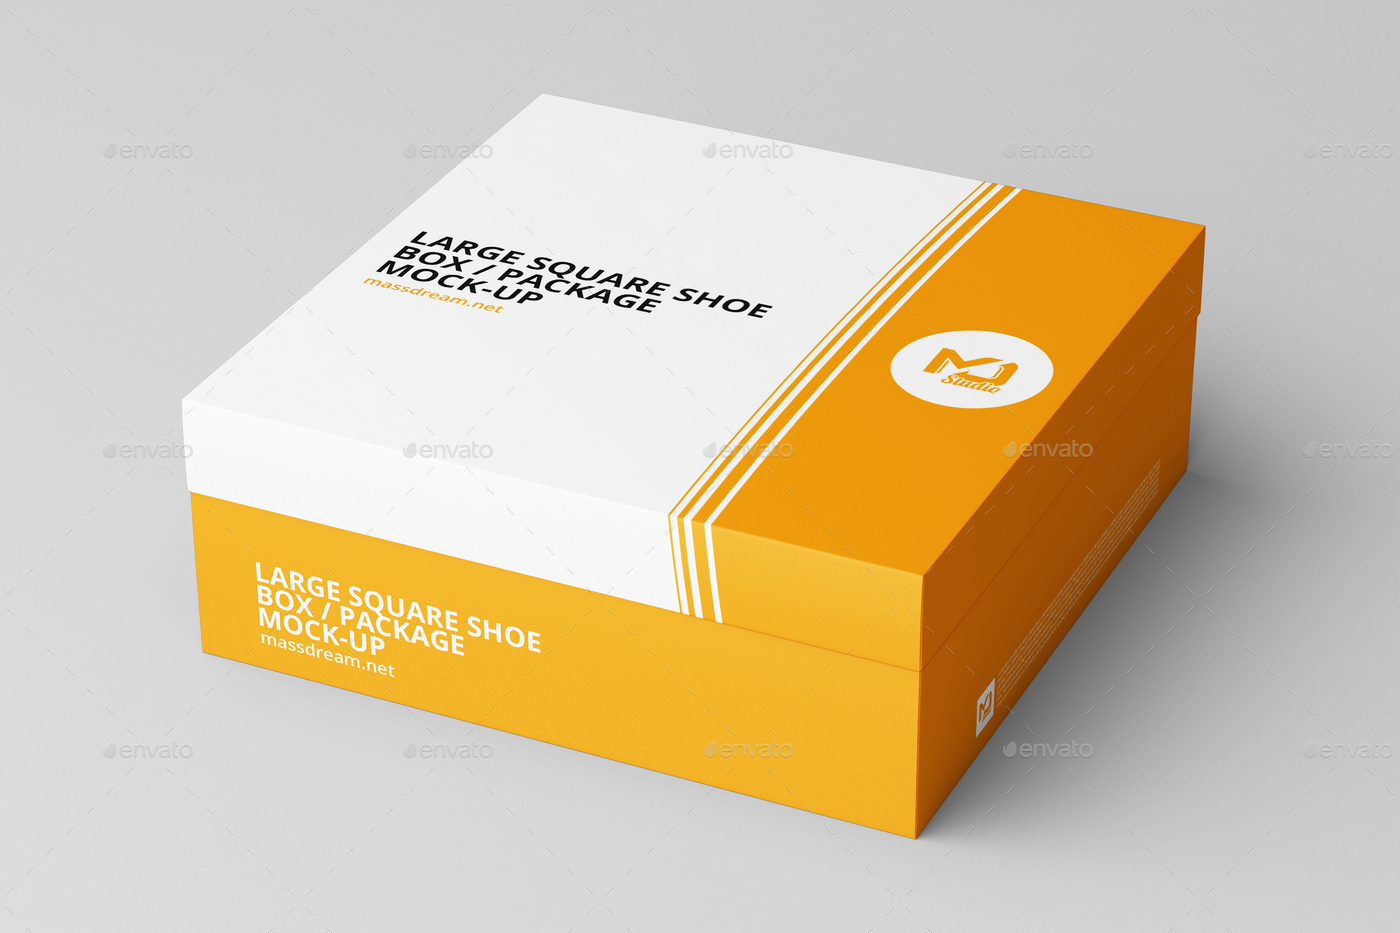 Download Large Square Shoe Box / Package Mock-Up by MassDream ...